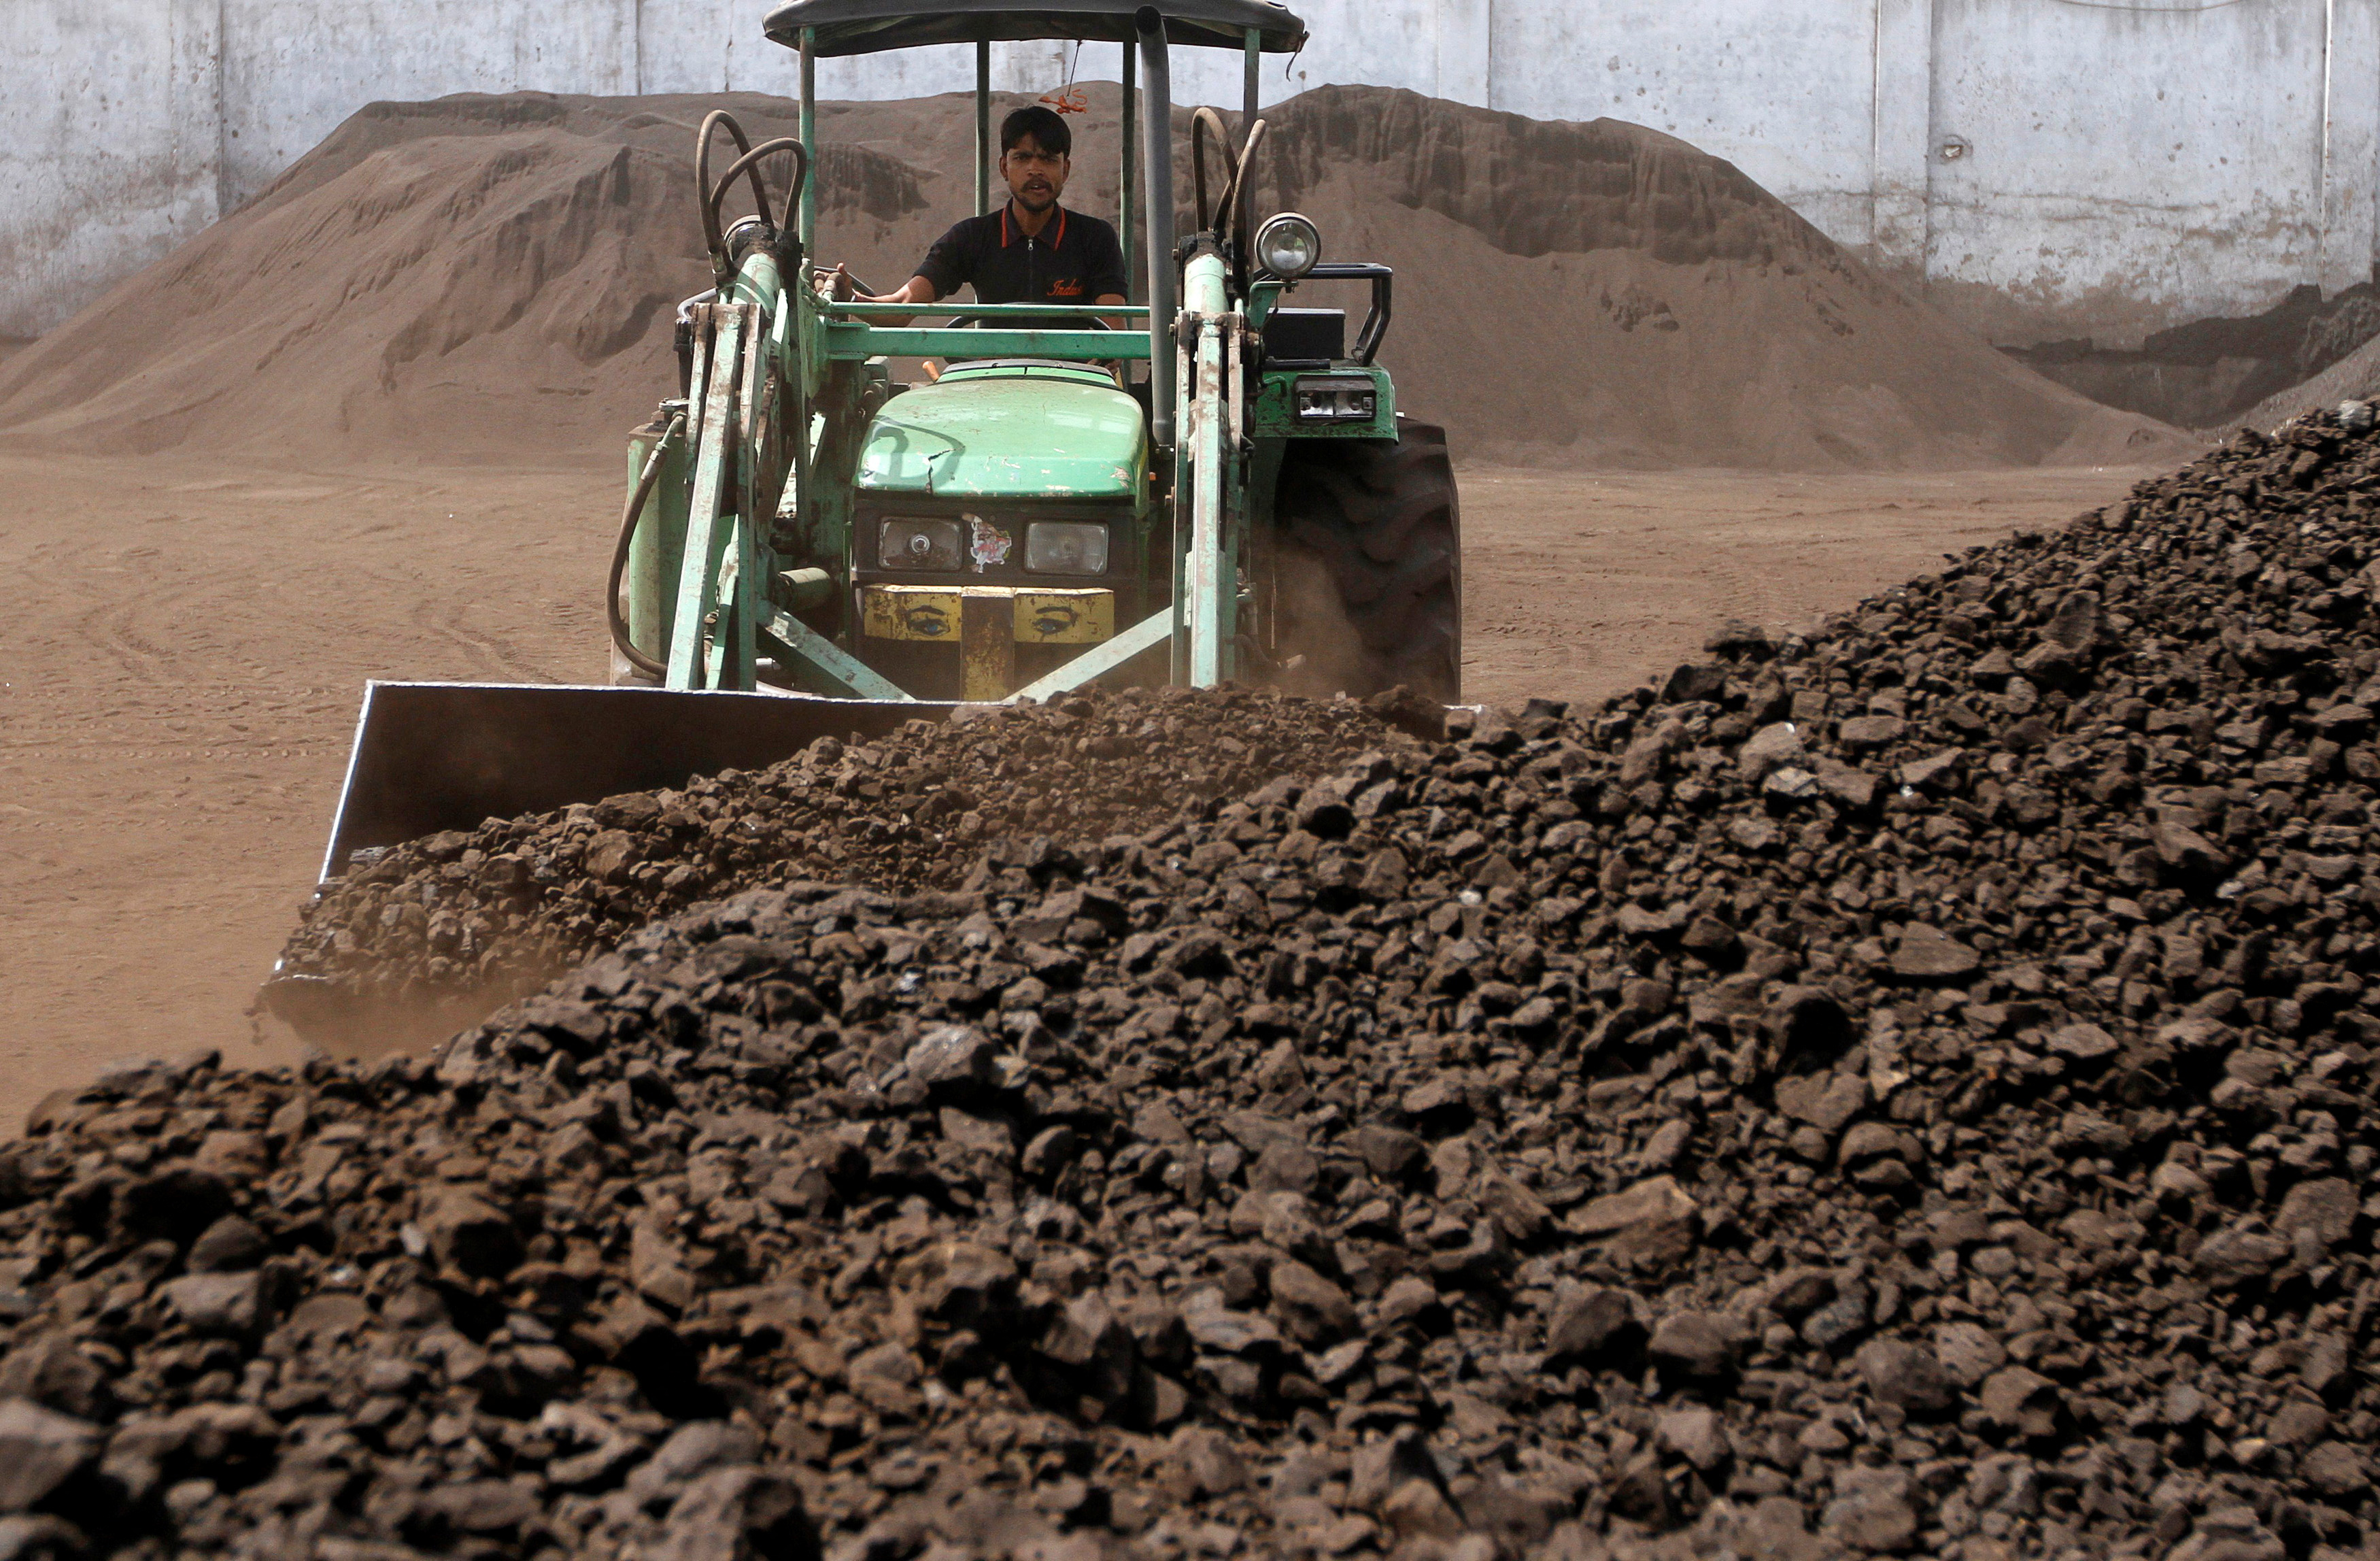 A worker uses a loader to assemble coal at a yard in the western Indian city of Ahmedabad